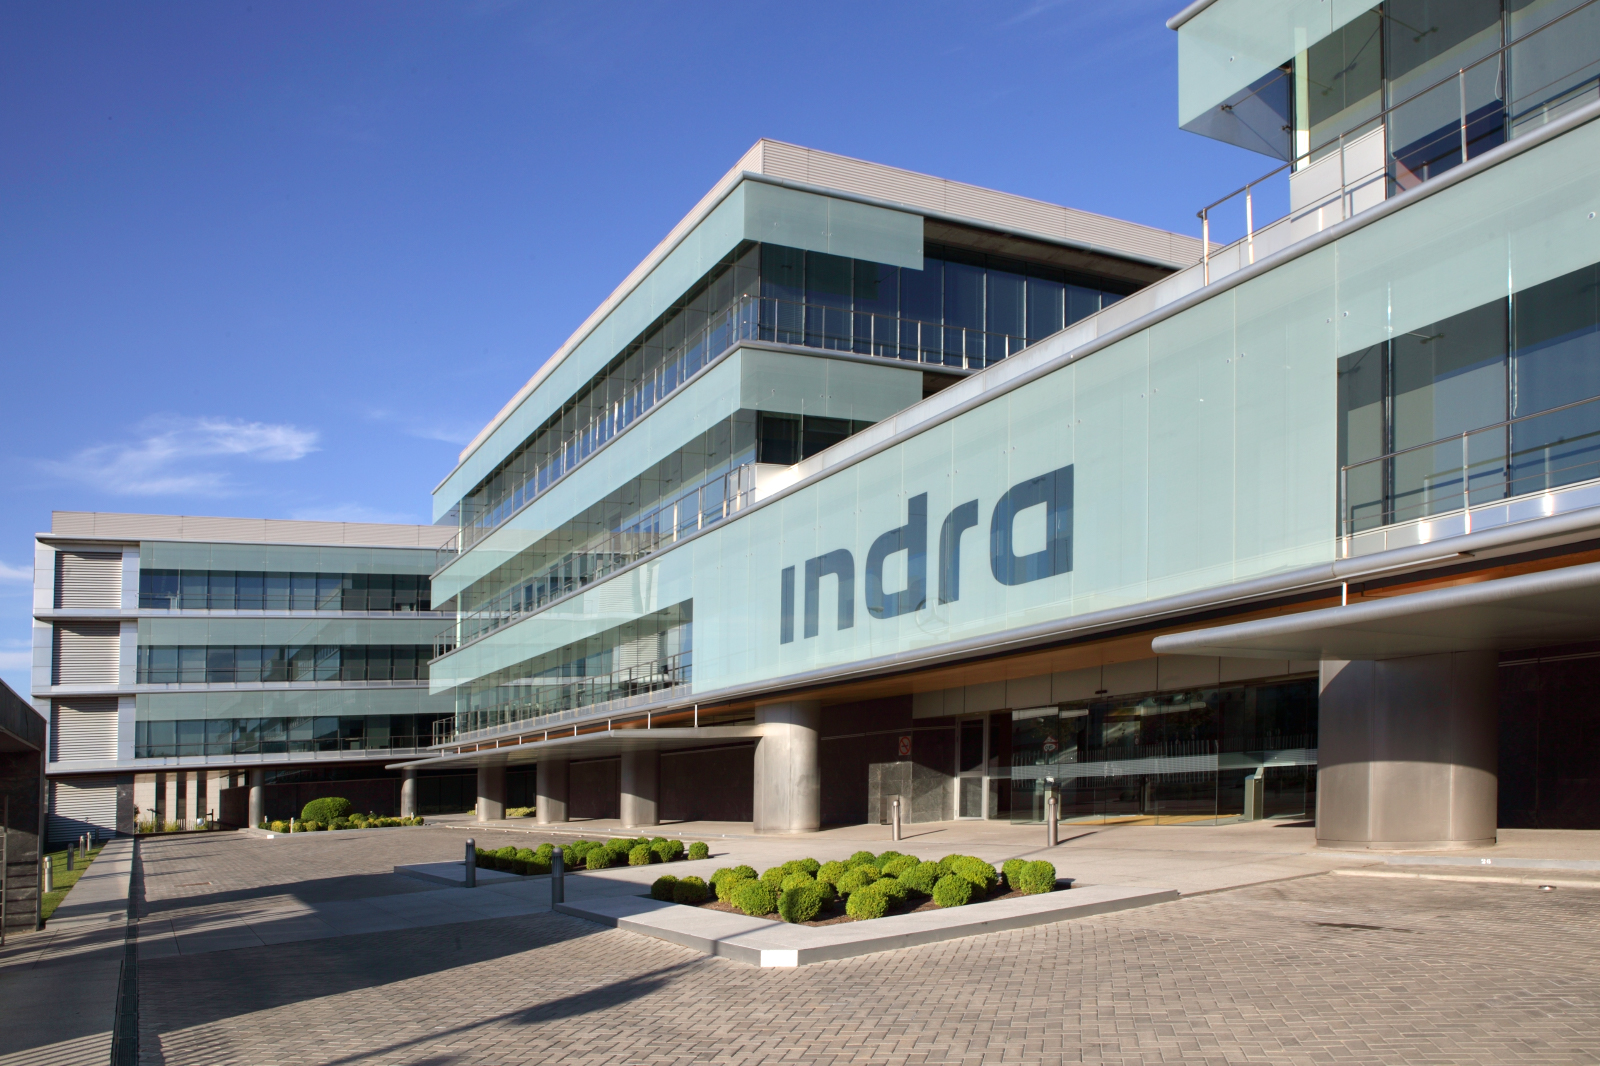 Indra opens a head office in Ireland to expand its mobility business